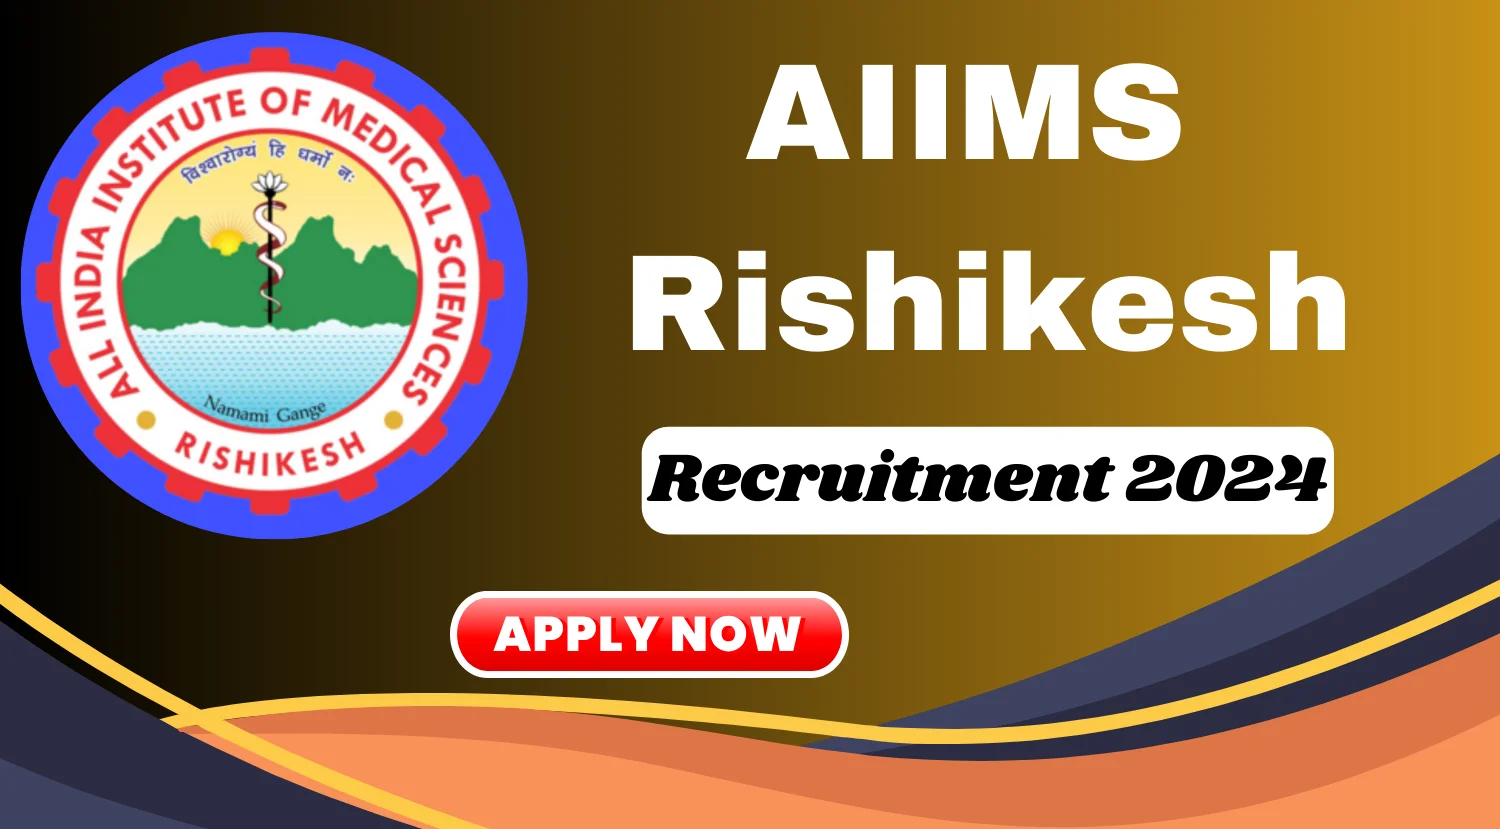 AIIMS Rishikesh roject Technical Support Recruitment 2024